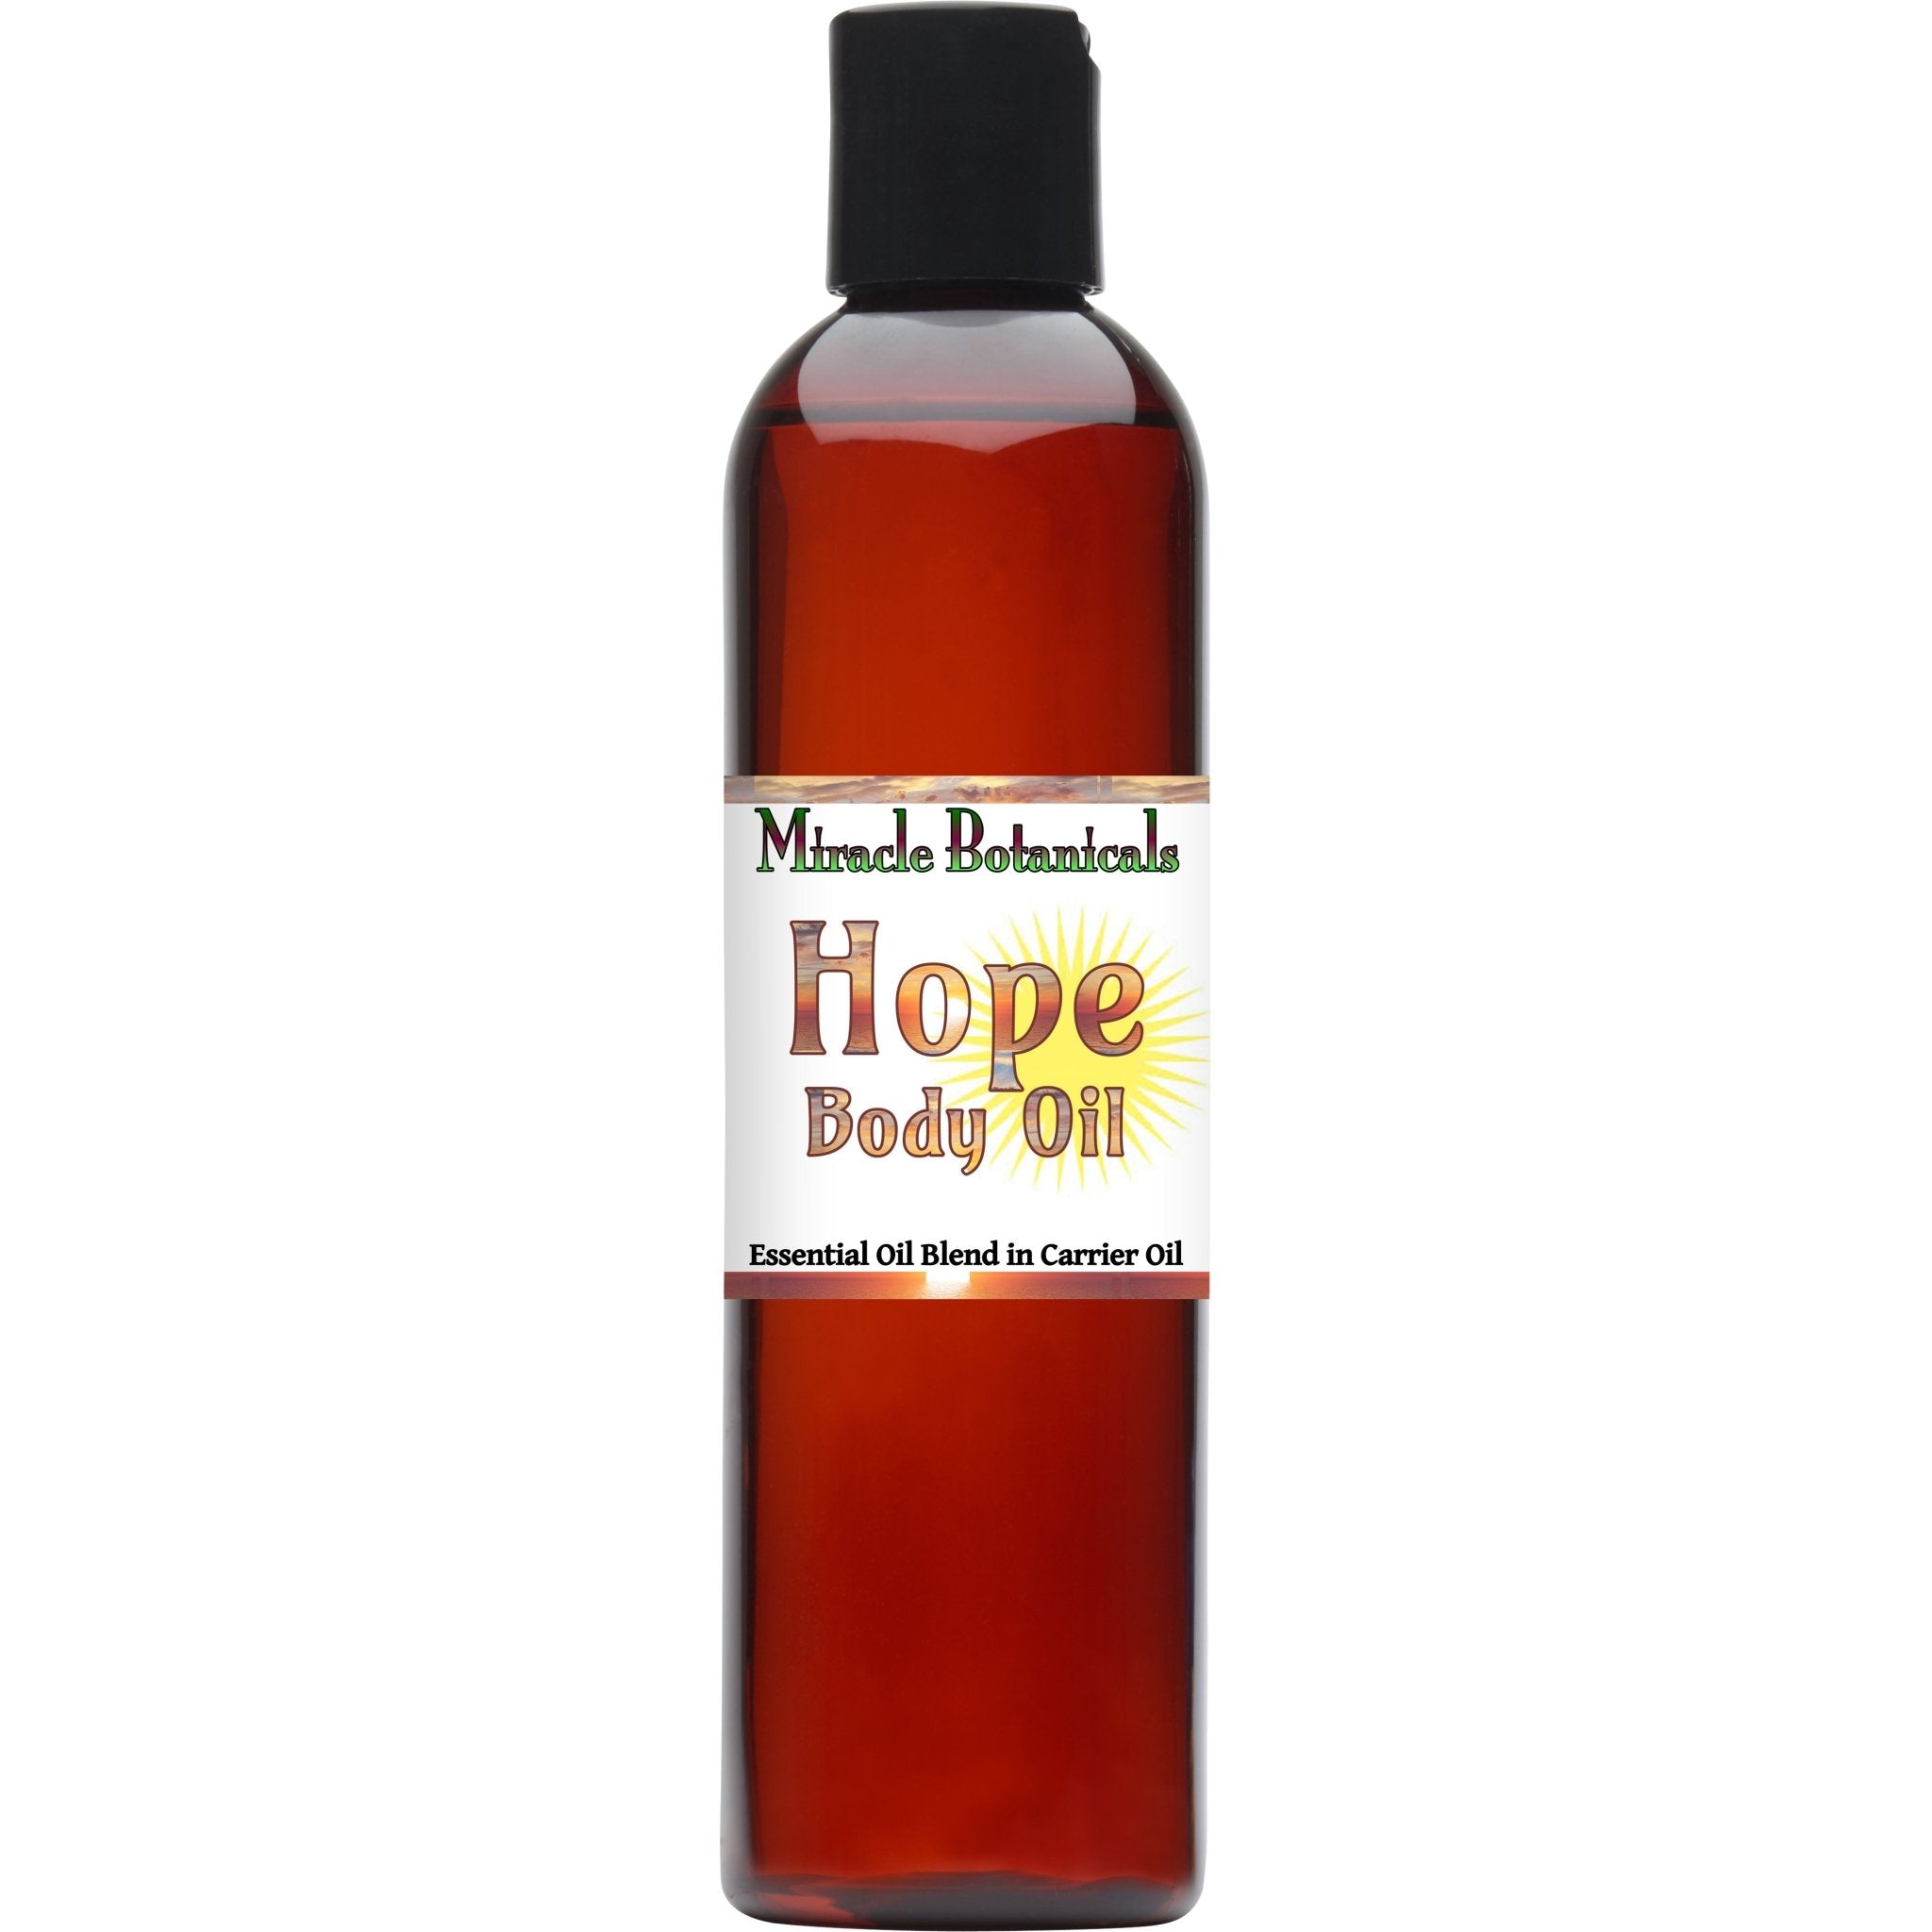 Hope Body Oil - 100% Pure Blend of Essential Oils in Argan Oil for Beauty and Radiance - Miracle Botanicals Essential Oils